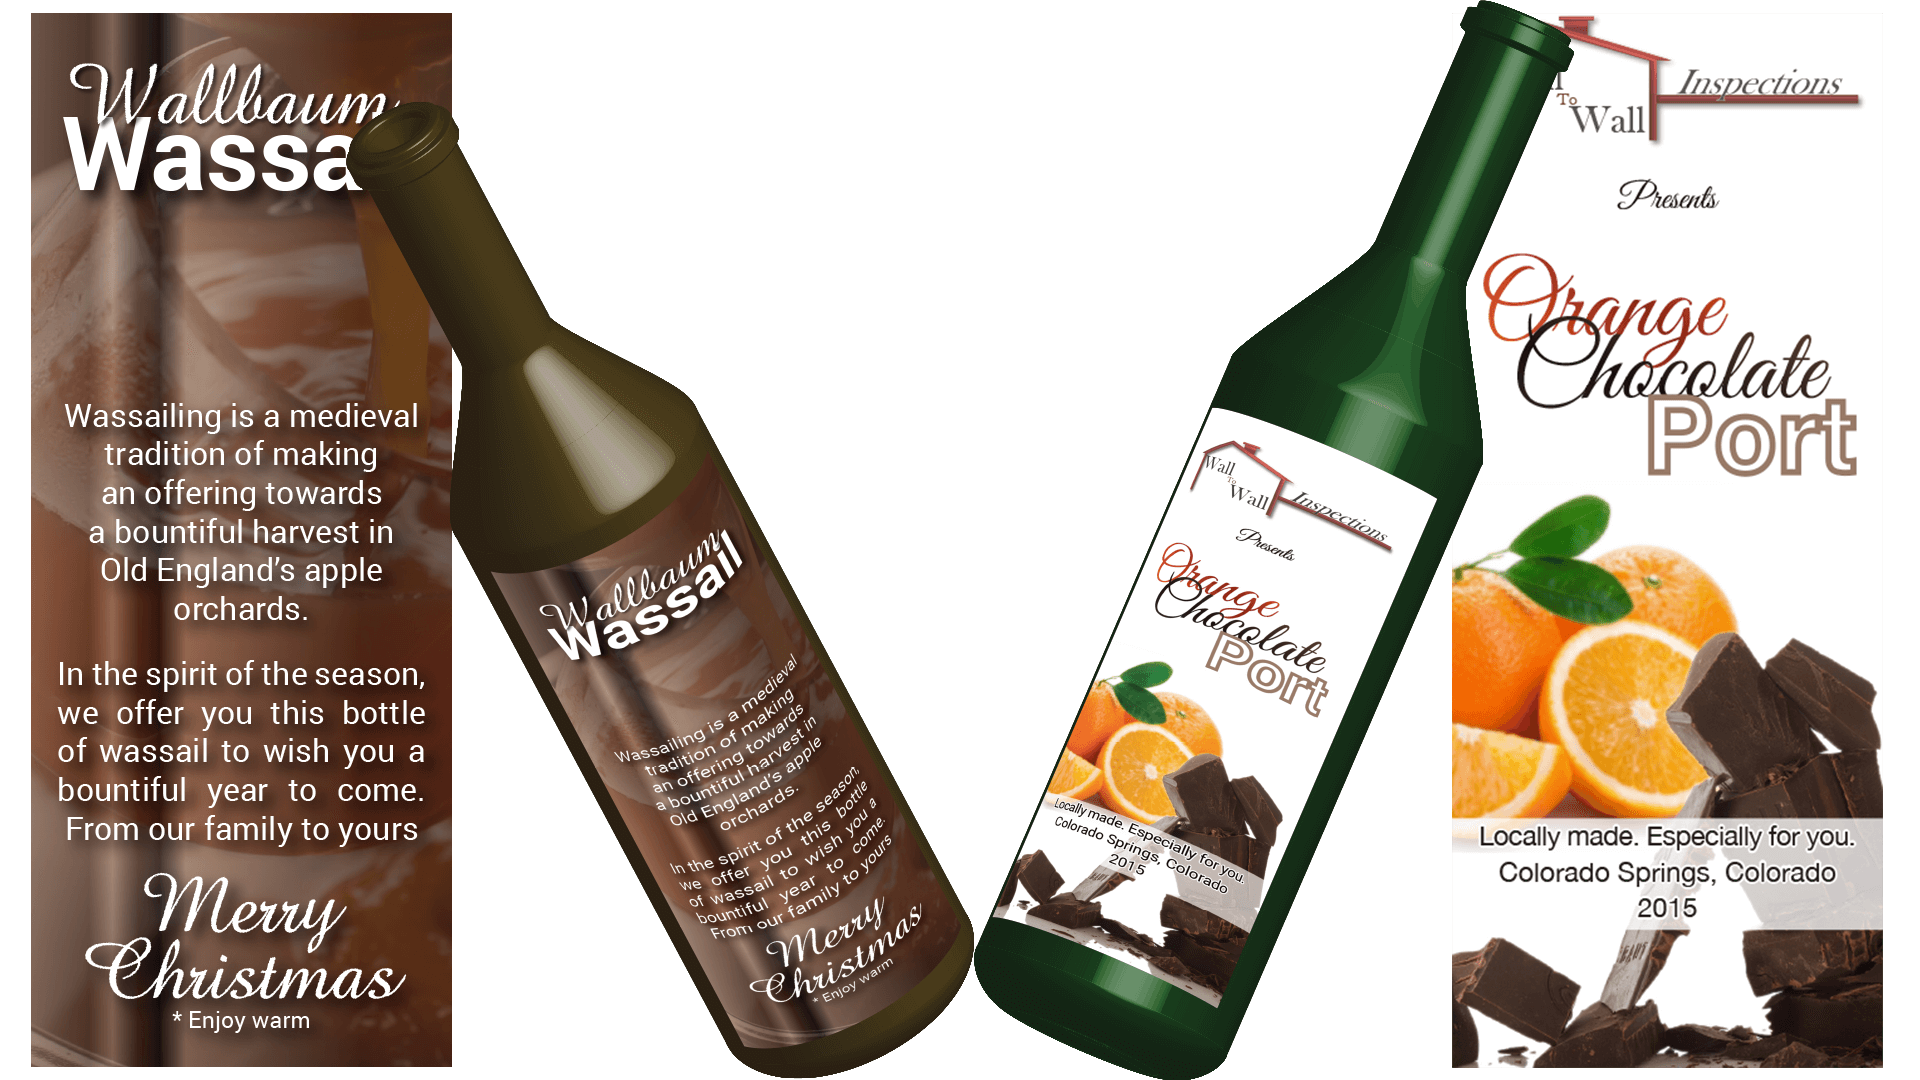 This image showcases how the Wall to Wall Inspections brand was incorporated onto custom wine and Wassail labels. These festive labels were created as holiday promotional materials.